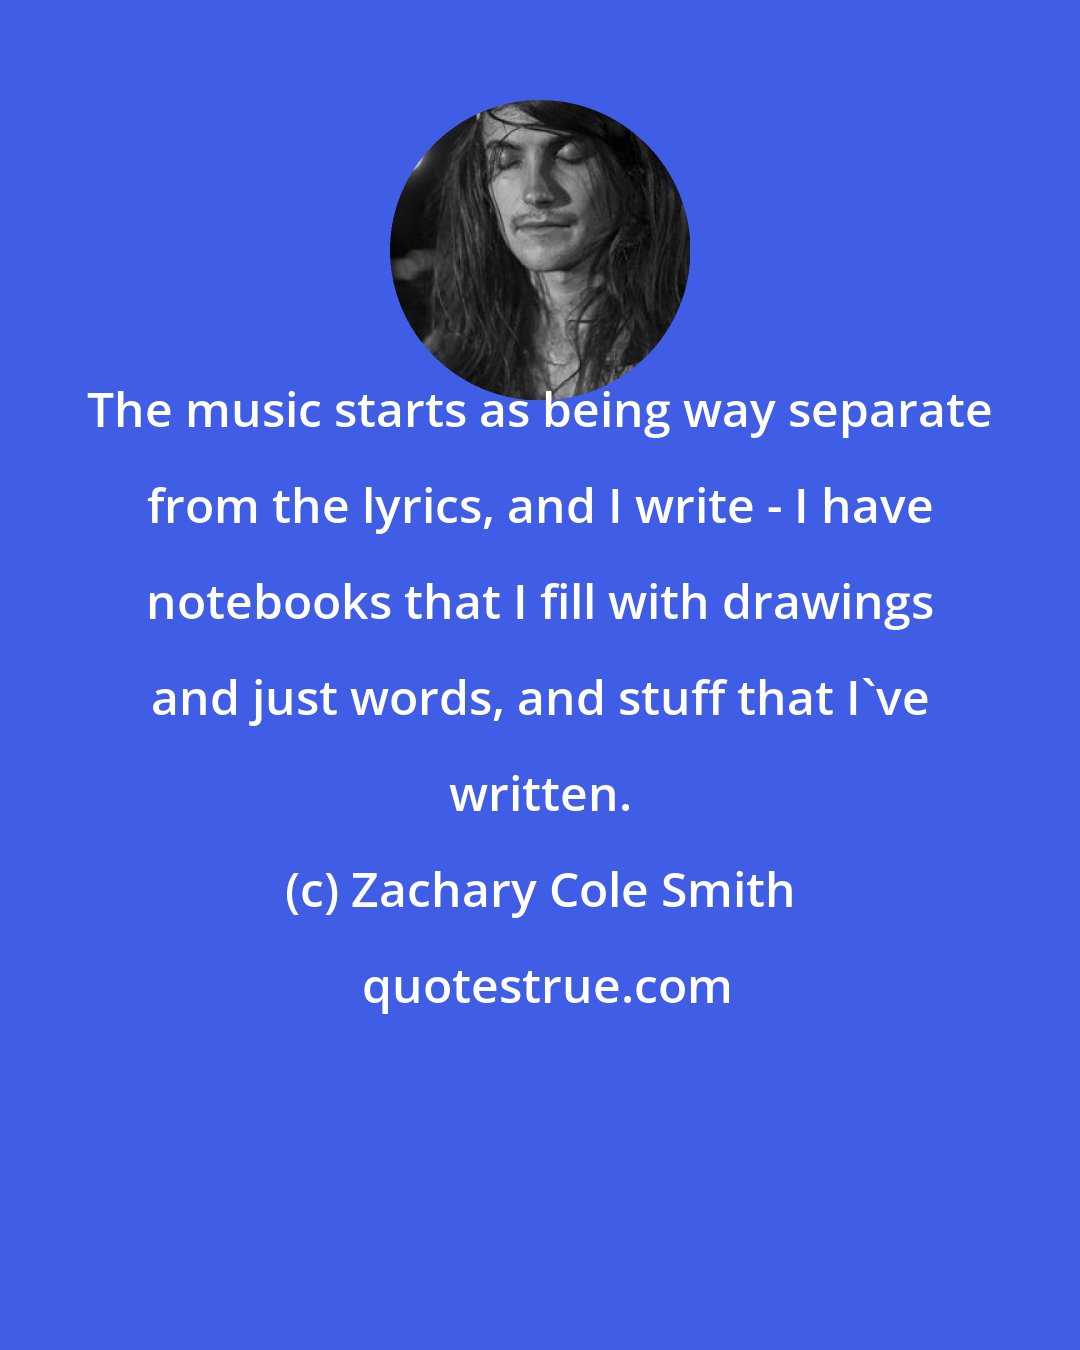 Zachary Cole Smith: The music starts as being way separate from the lyrics, and I write - I have notebooks that I fill with drawings and just words, and stuff that I've written.